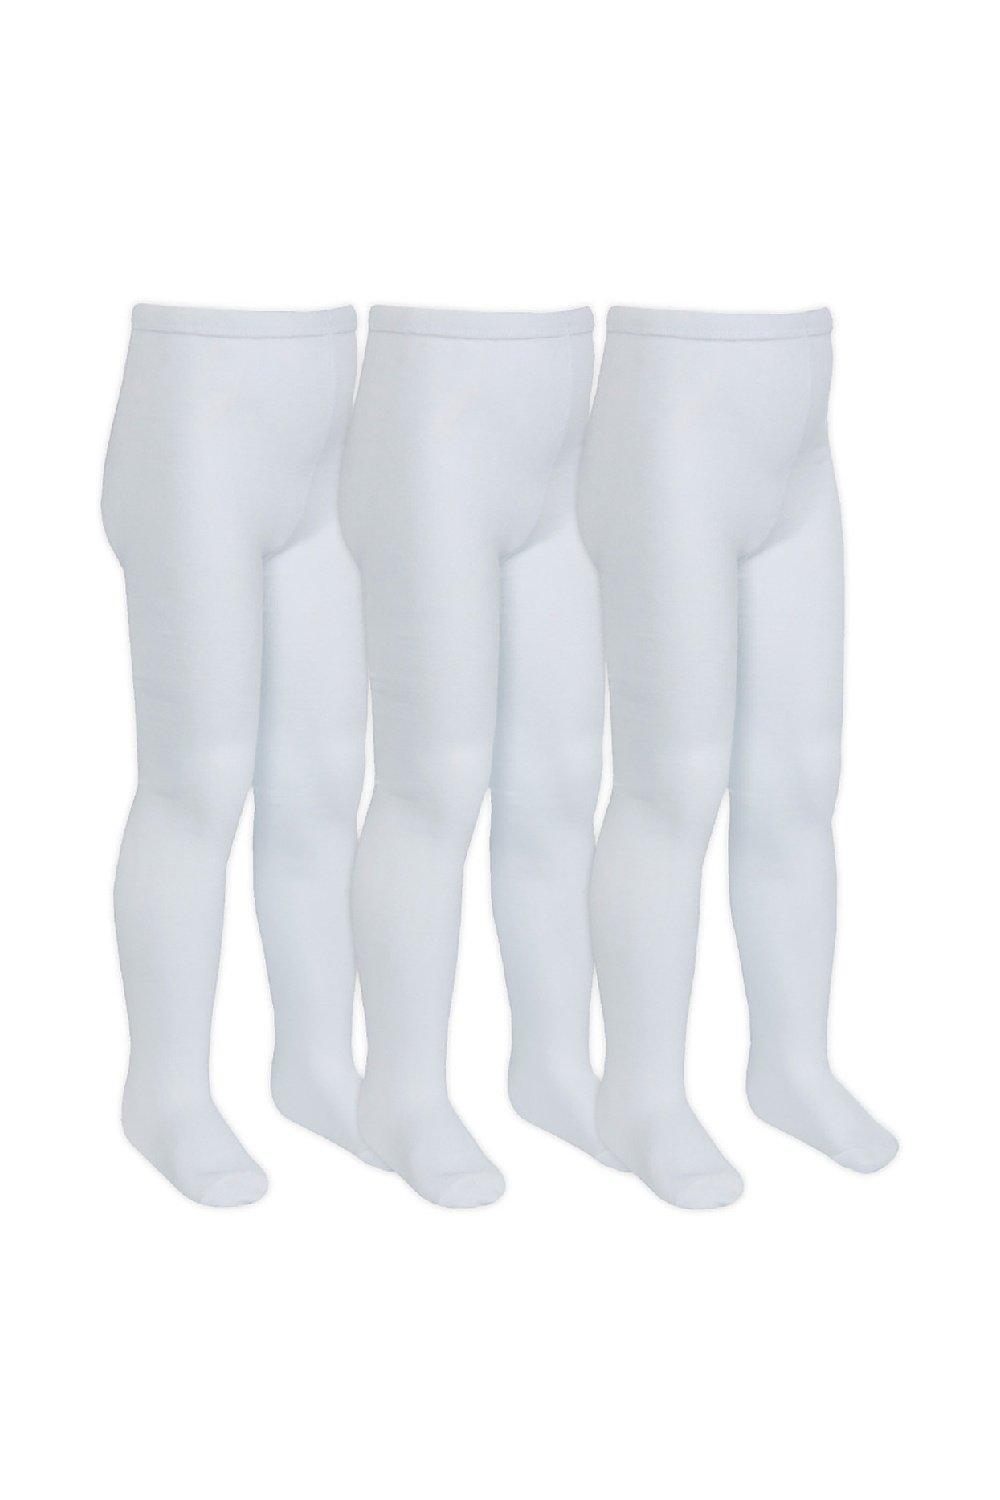 3 Pair Super Soft & Warm Breathable Bamboo School Tights